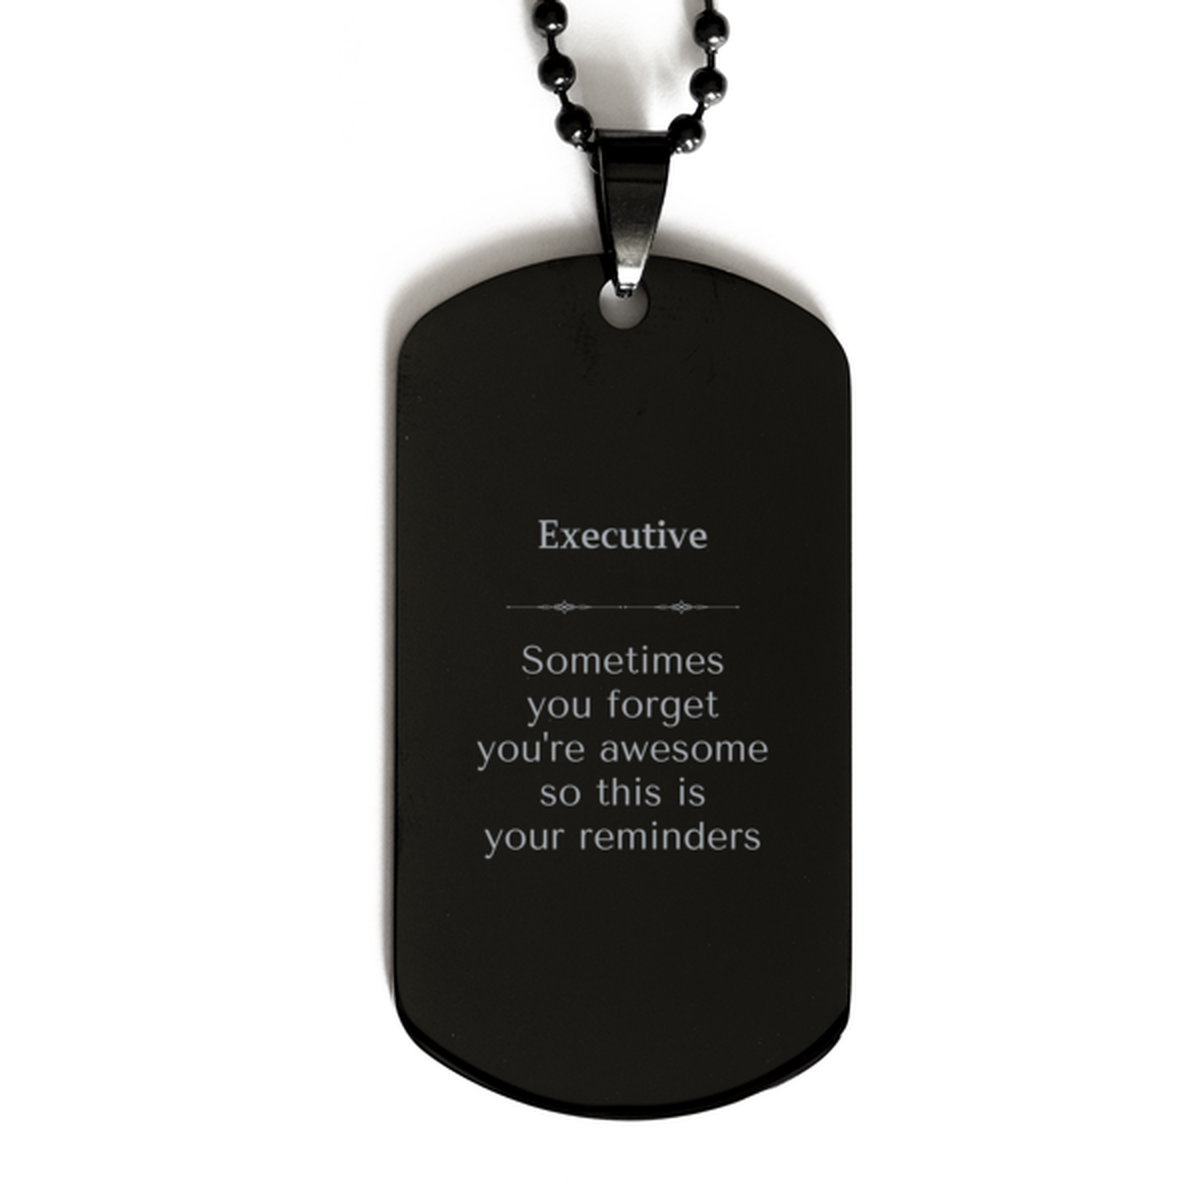 Sentimental Executive Black Dog Tag, Executive Sometimes you forget you're awesome so this is your reminders, Graduation Christmas Birthday Gifts for Executive, Men, Women, Coworkers